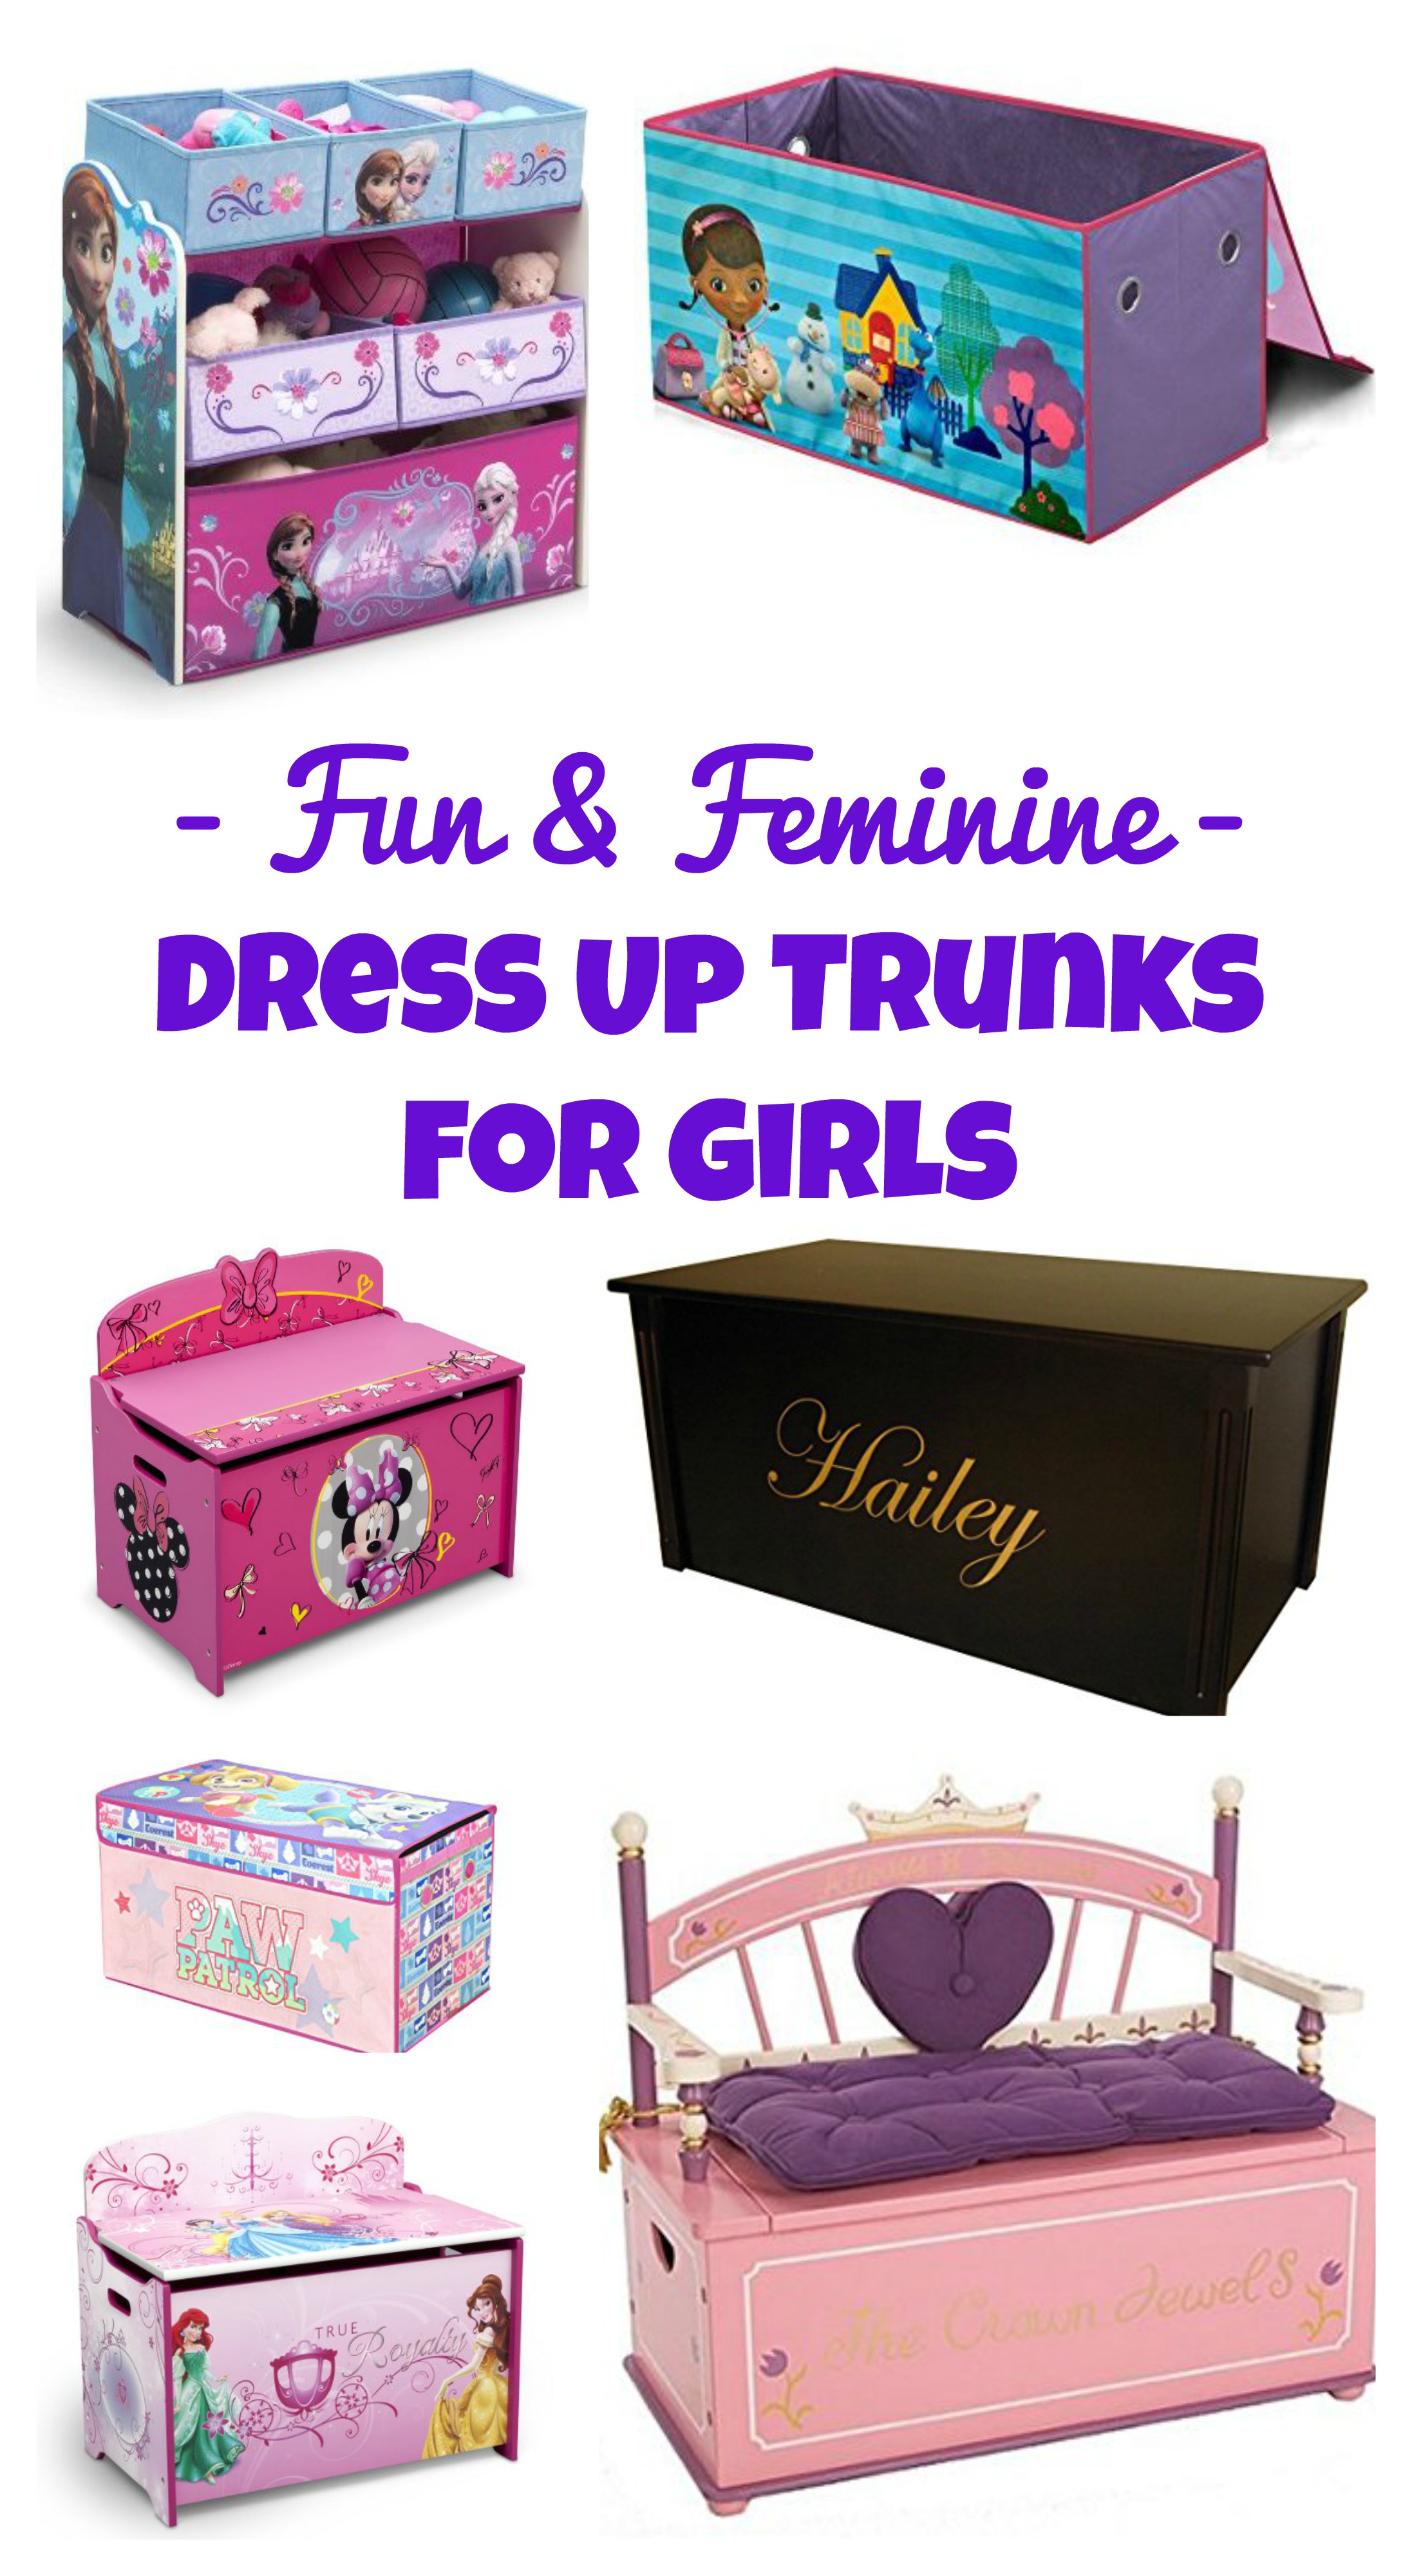 Dress Up gear out of control? Want an easy solution for the mess? Get a Girls Dress Up Clothes Trunks - check out this post and see TONS of super cute, feminine, and fun dress up trunks for girls! www.kidslovedressup.com dress up storage, storage trunk, toy storage for girls, toy boxes for girls, girls storage, kids storage, storage box for kids, kids storage, kids dress up